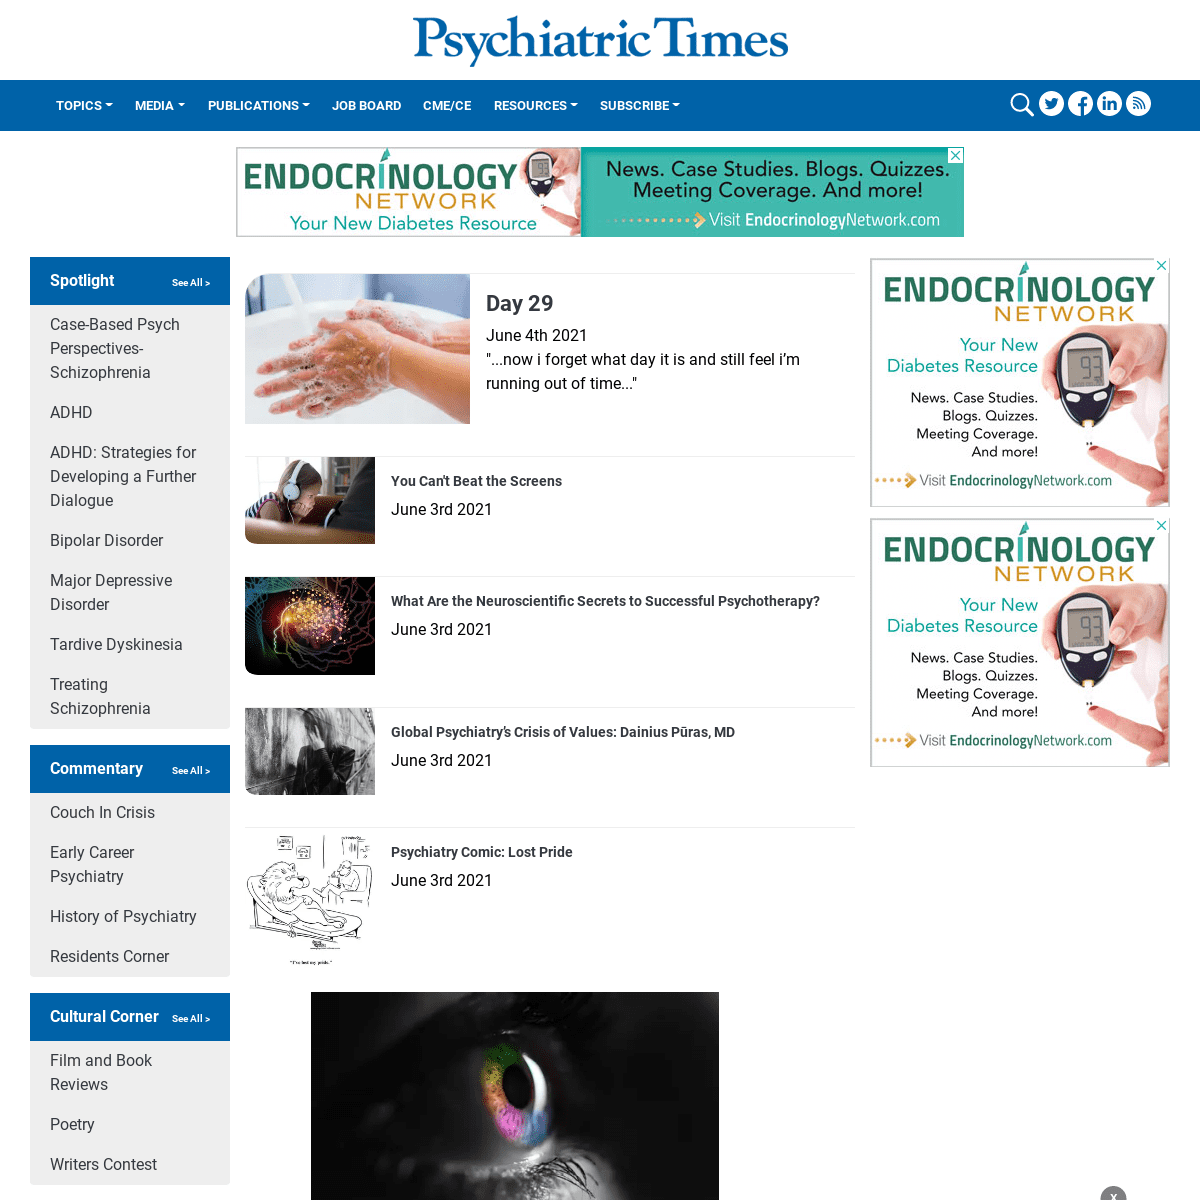 A complete backup of https://psychiatrictimes.com